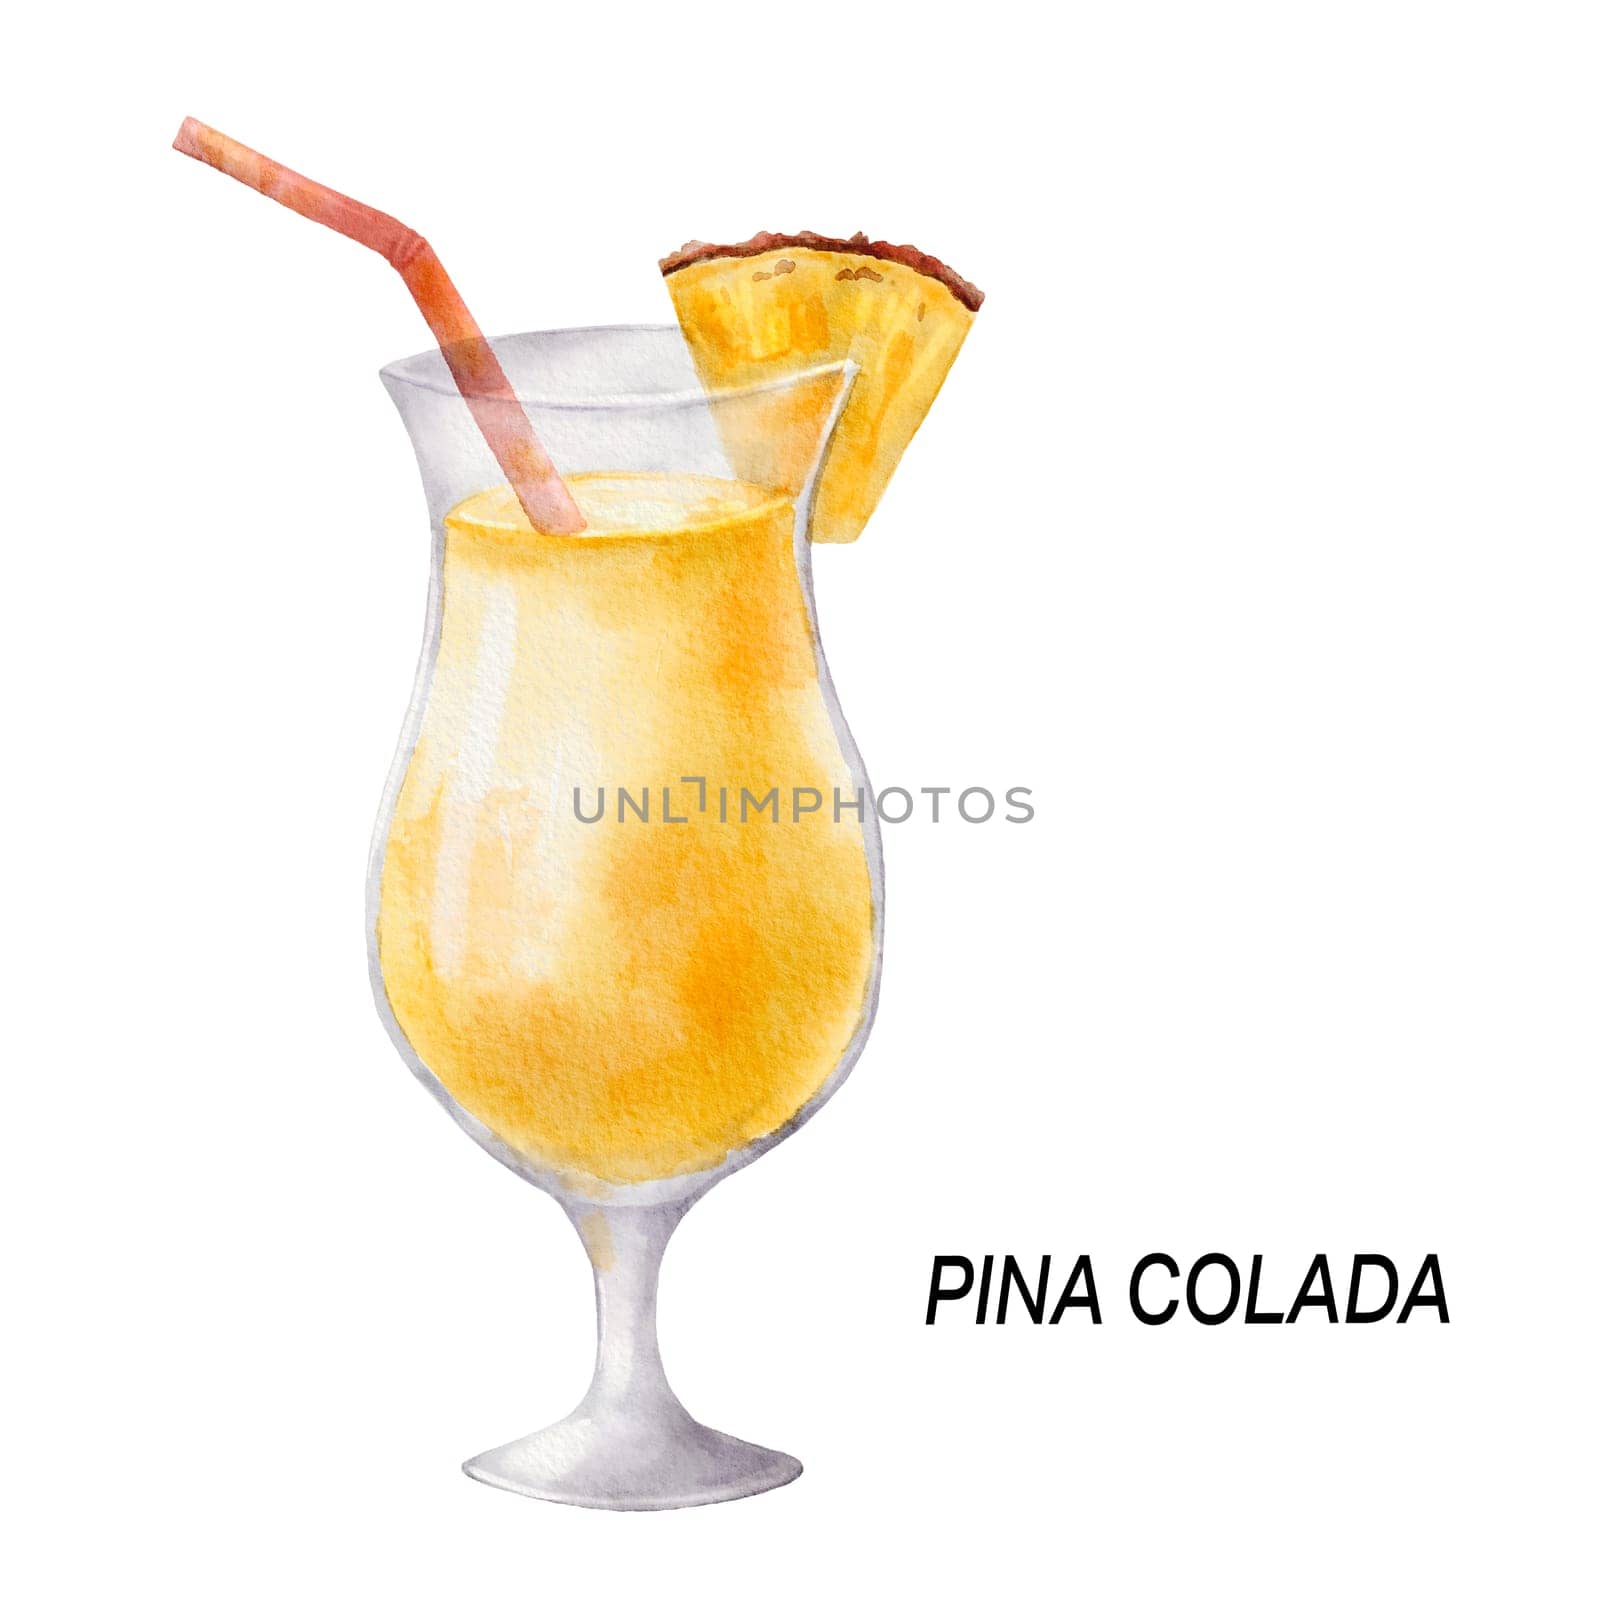 Pina colada cocktail. Watercolor illustration of drink in glass isolated on white background